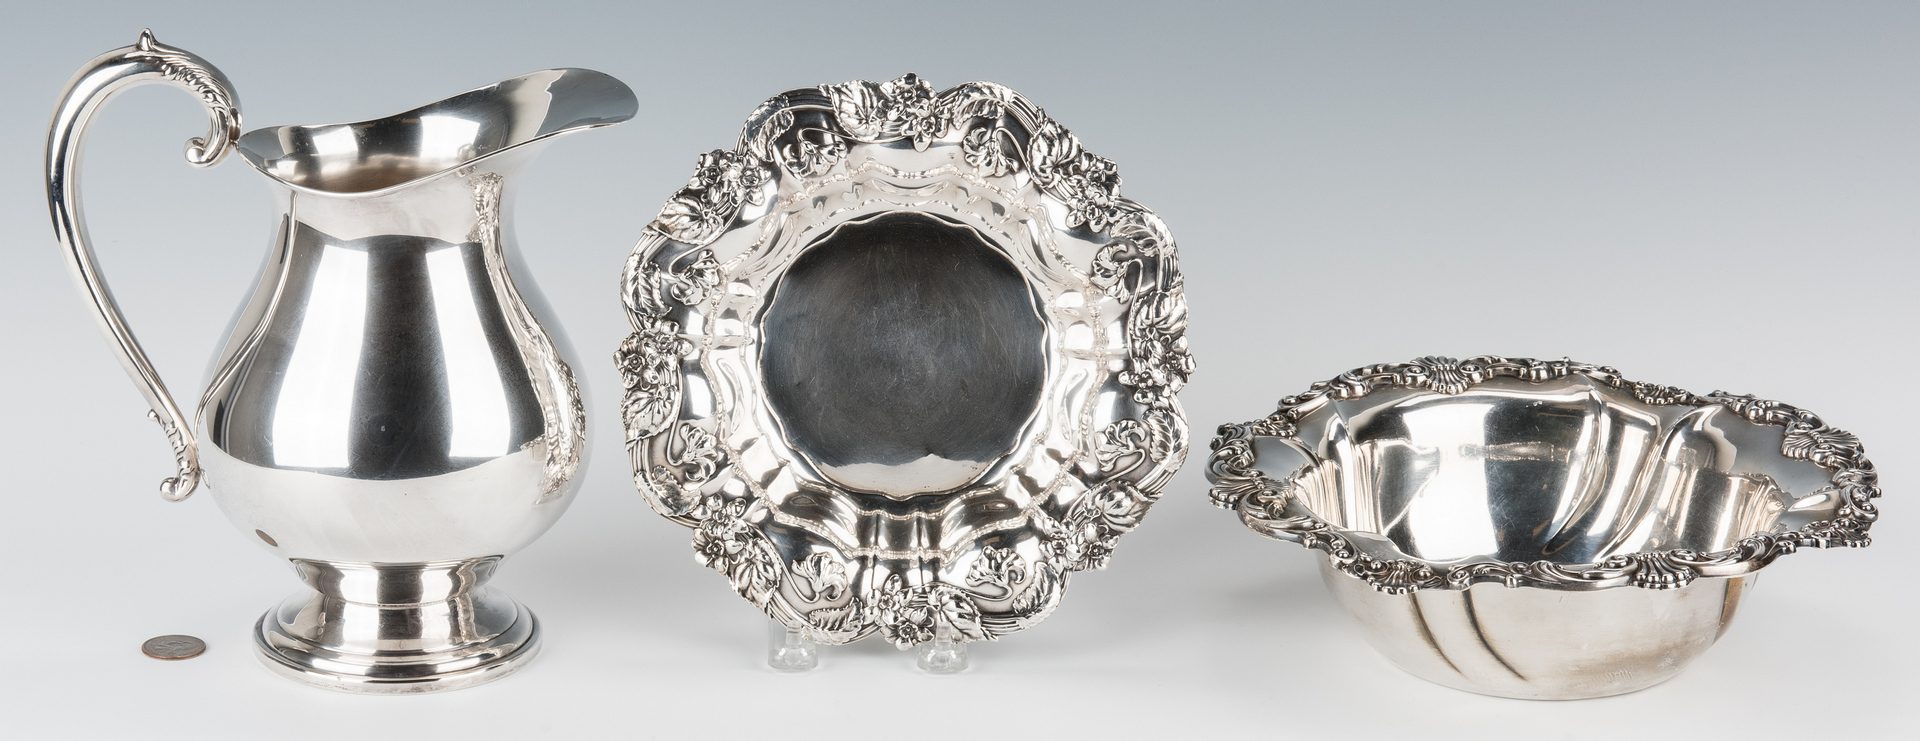 Lot 700: 3 Sterling Silver Table Items, incl. Repousse